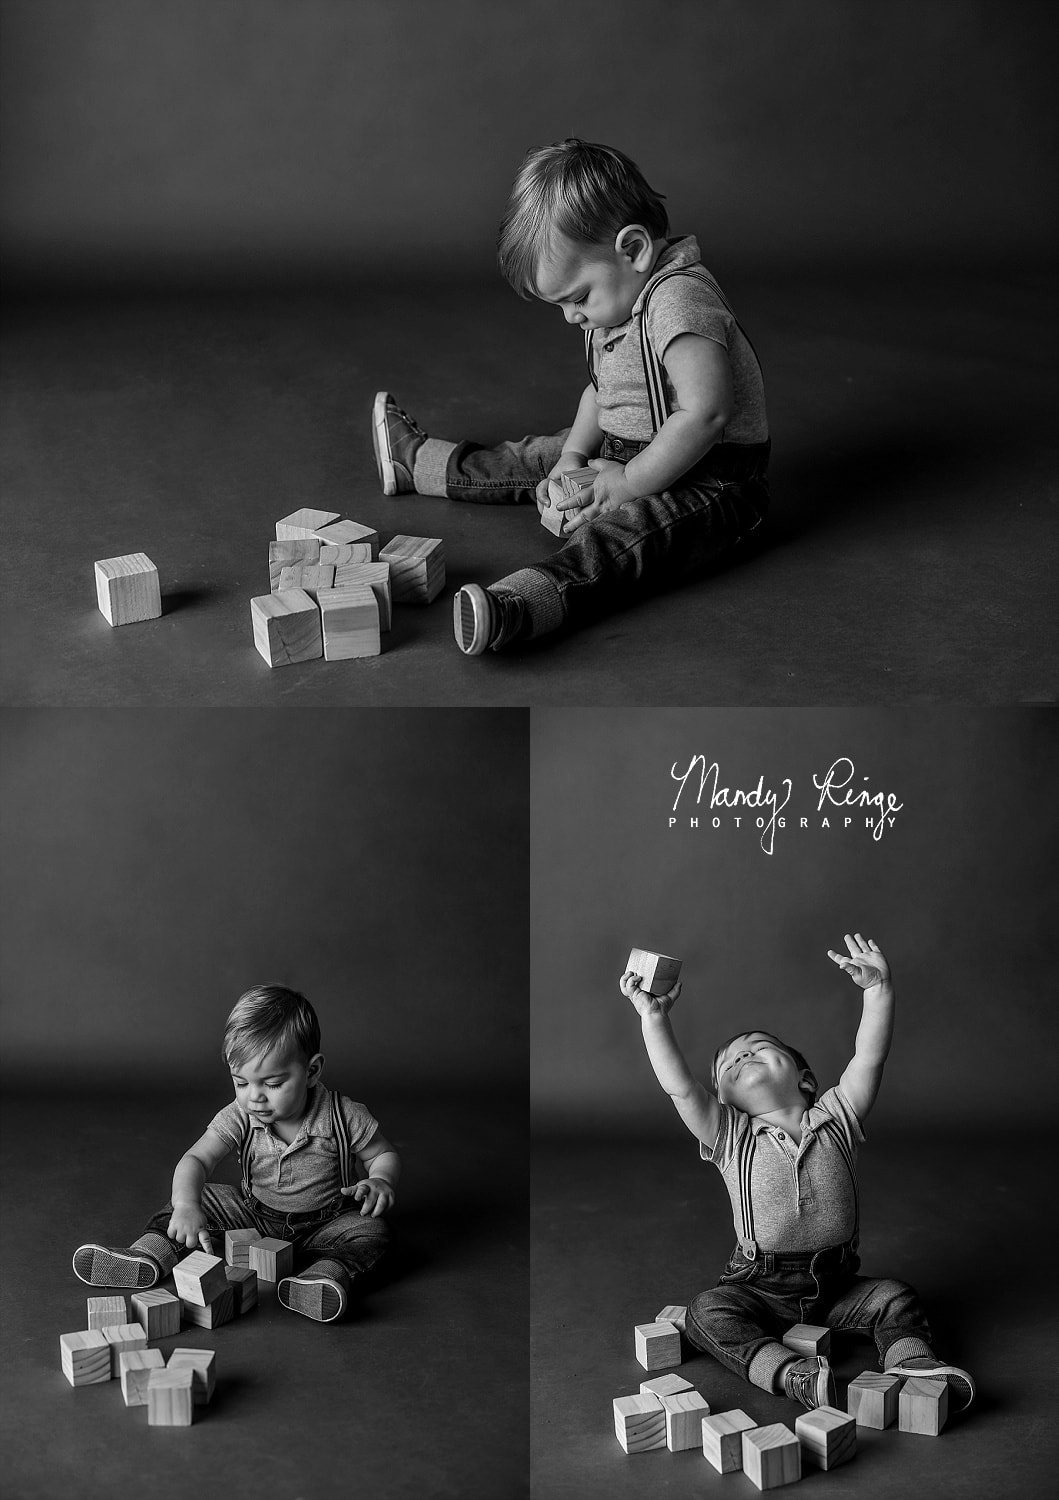 Black and white family portraits // simple, minimal, minimalistic // St Charles, IL Photographer // by Mandy Ringe Photography